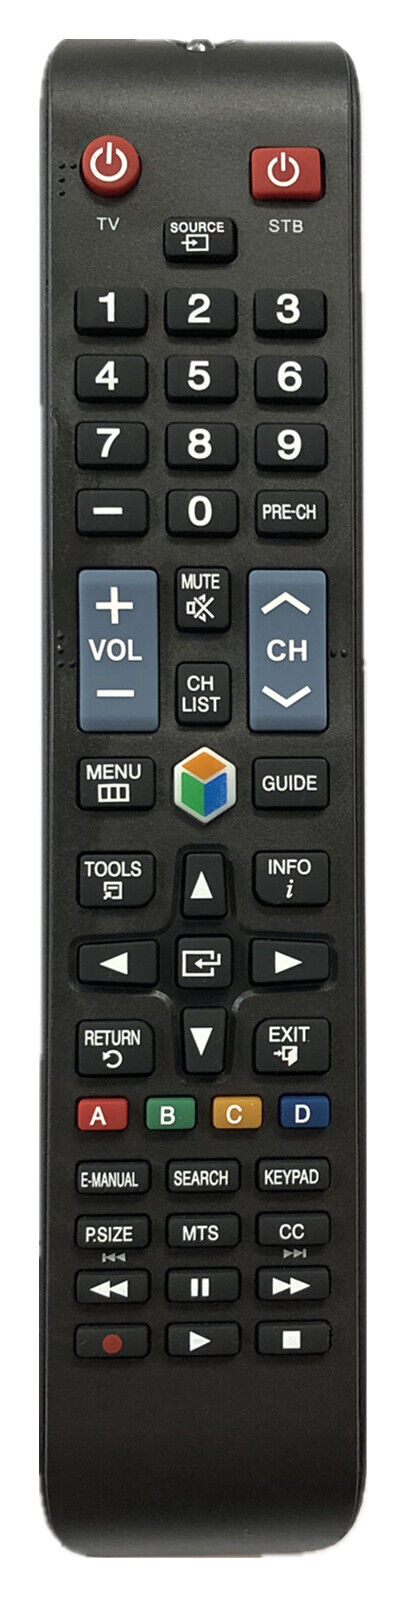 NEW TV REMOTE CONTROL BN59-01178W Fit for All Samsung LCD LED HD Smart TV